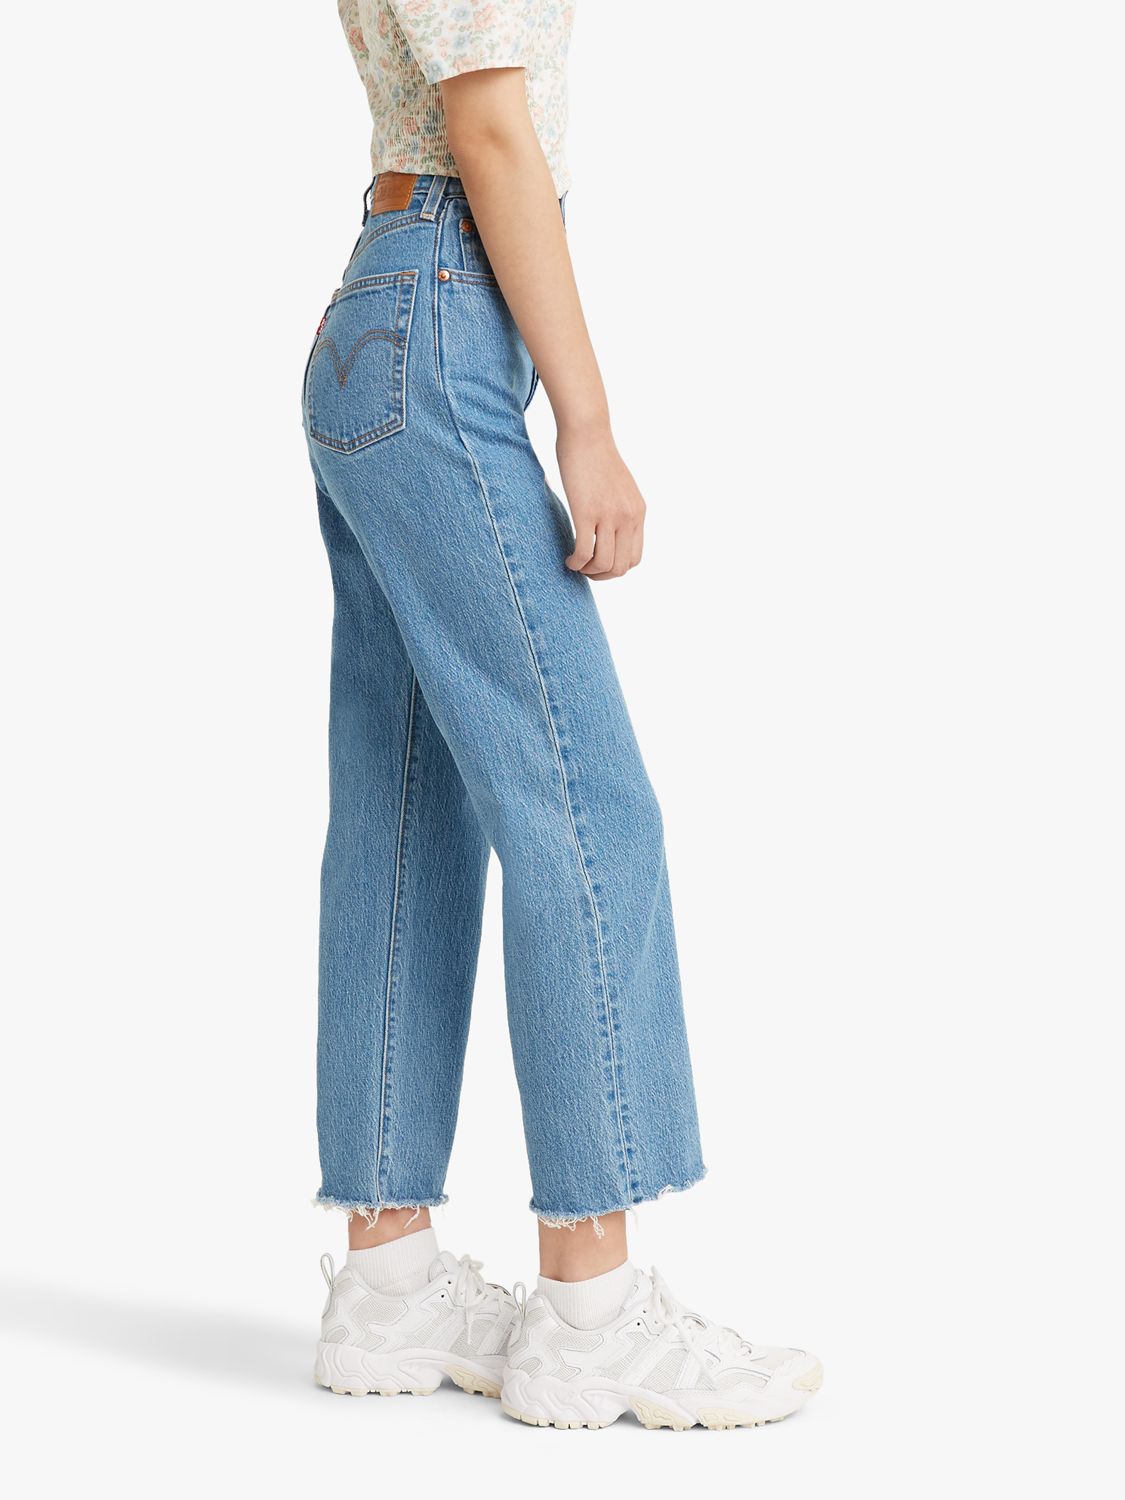 Levi's Ribcage Ultra High Rise Straight Cut Jeans, Jazz Wave